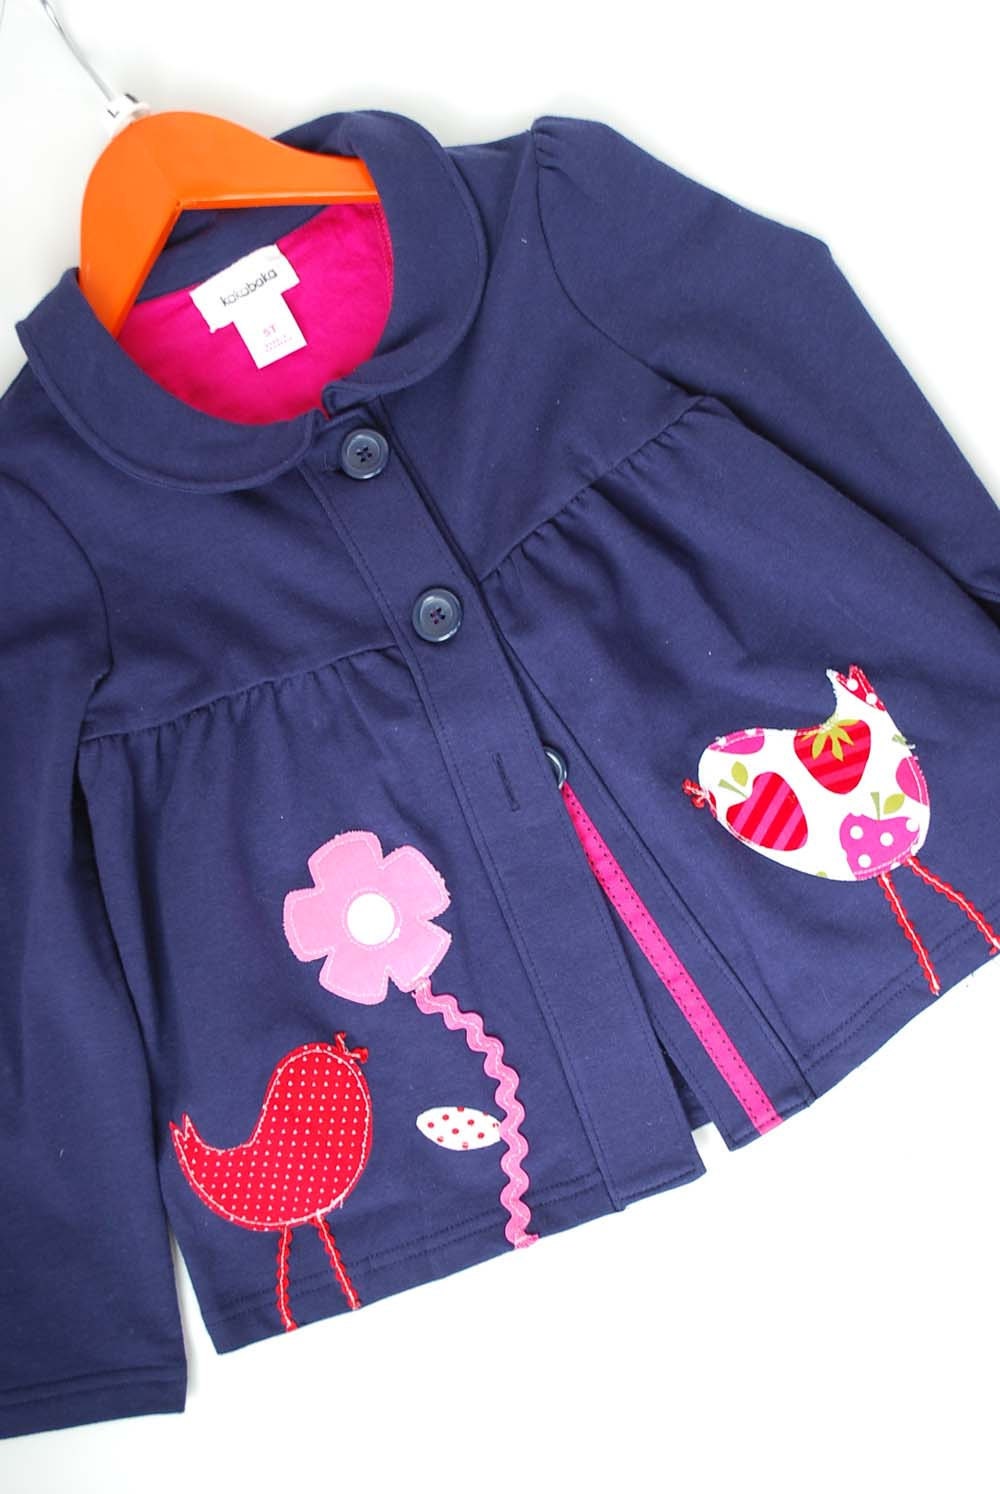 Spring Navy Blue Jacket 5T with Bird and Flower Applique